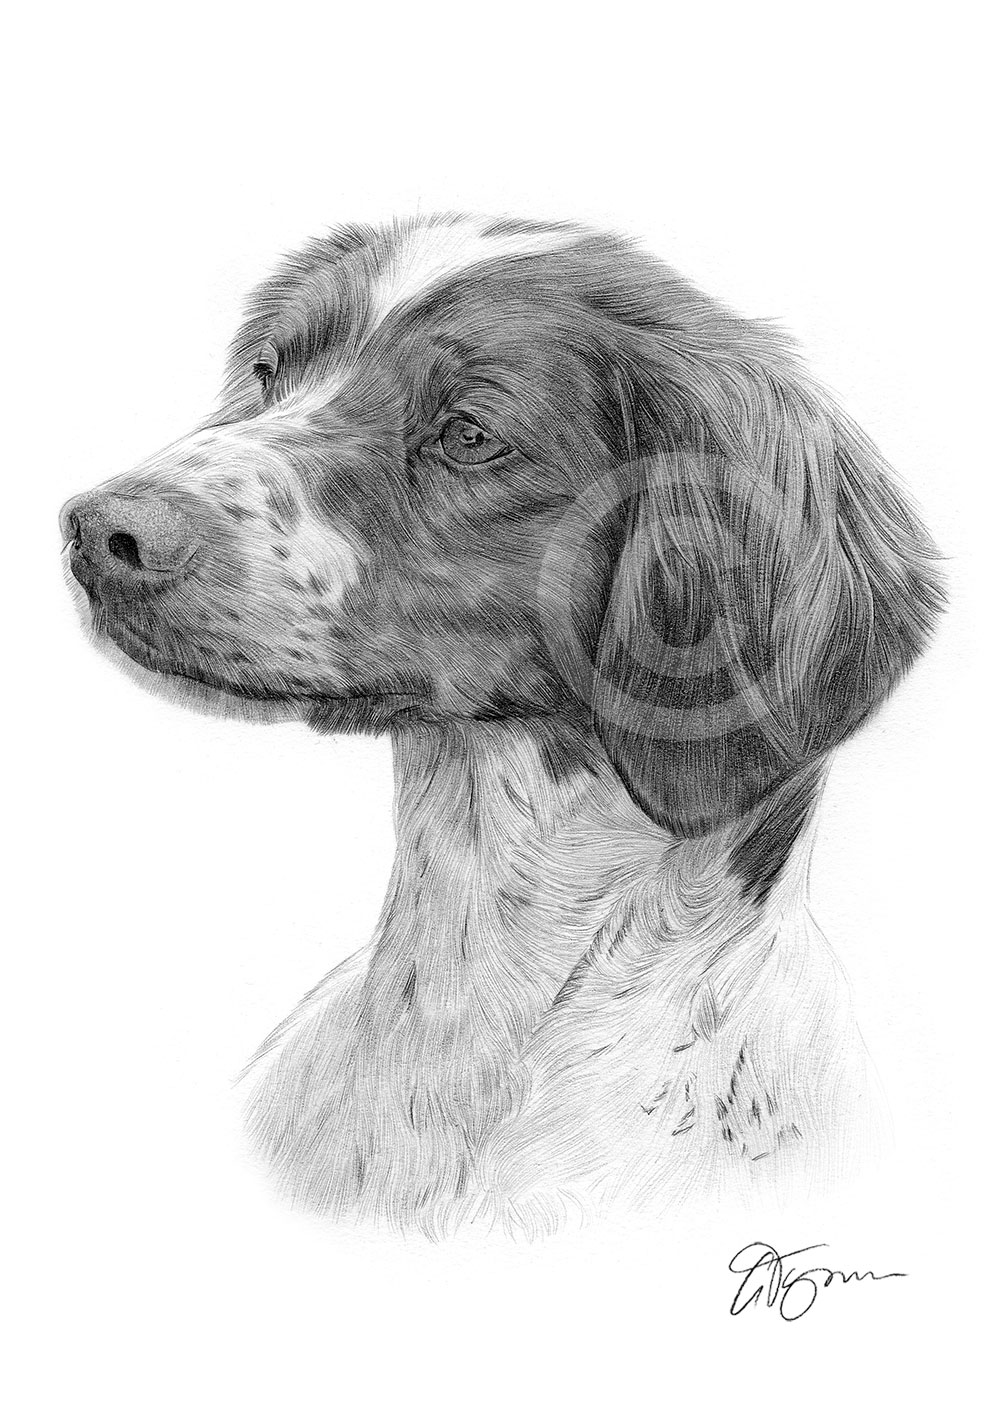 Pencil drawing of a young Brittany spaniel by artist Gary Tymon